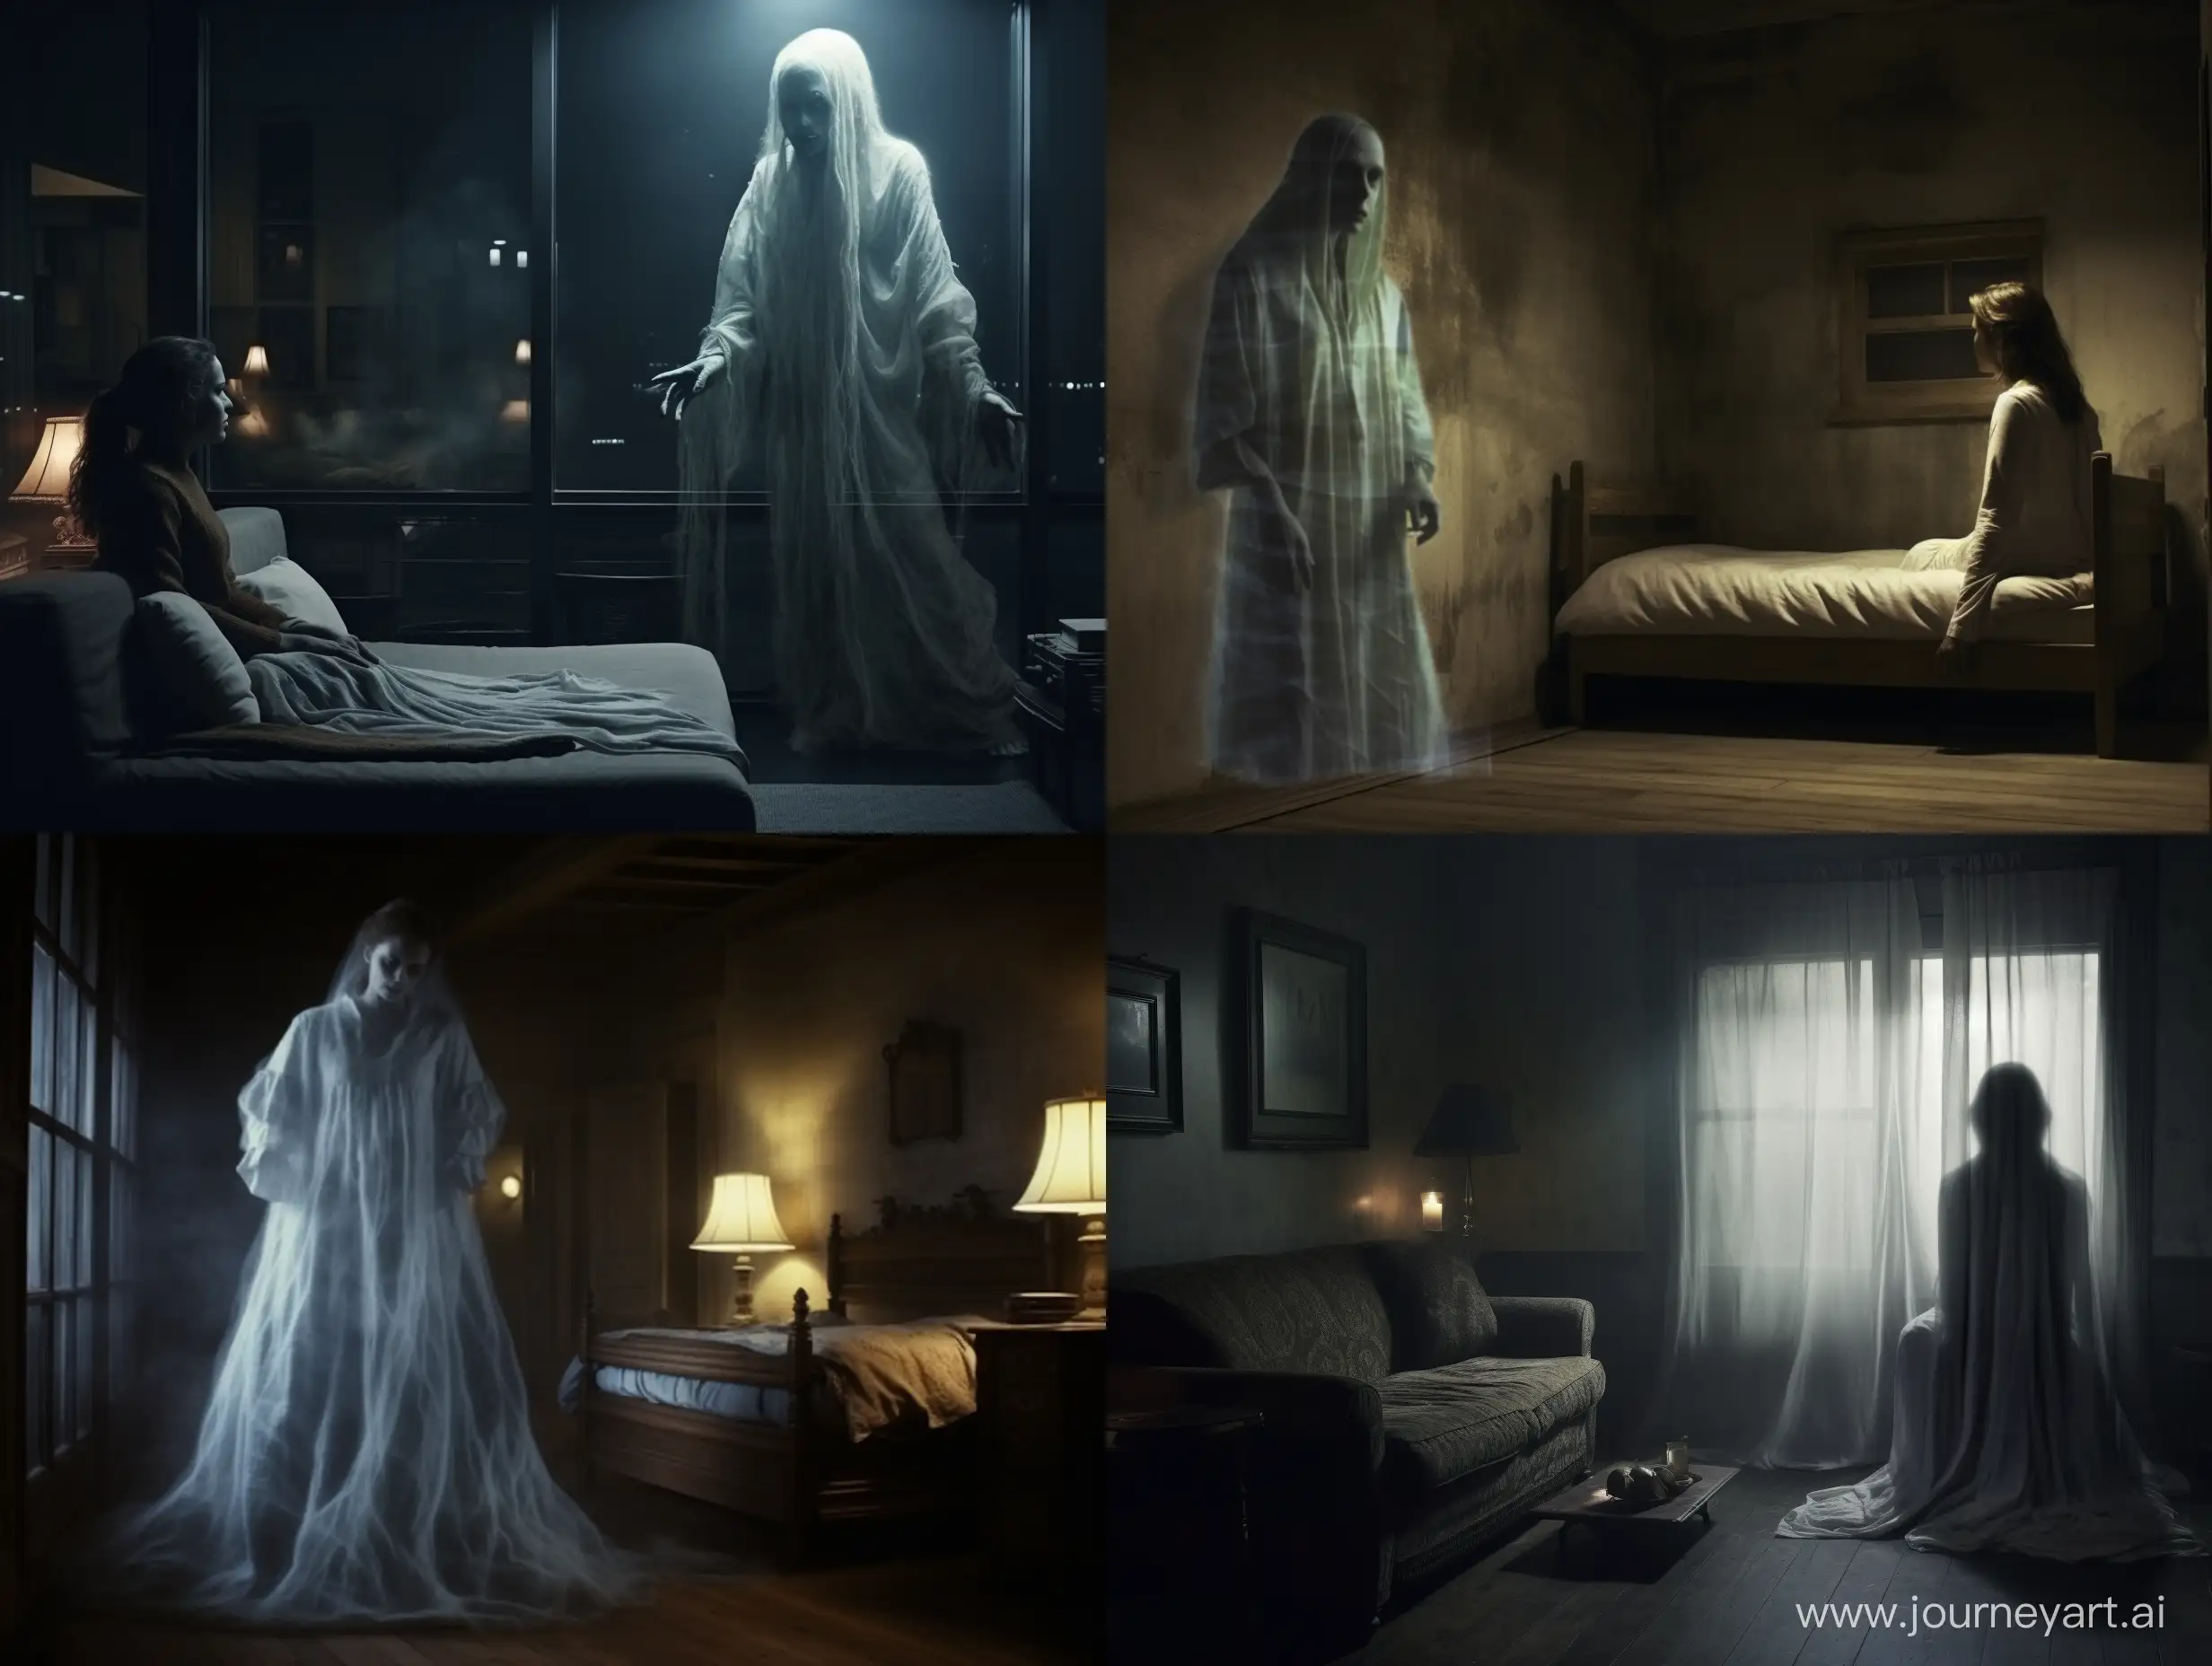 Ethereal-Encounter-Ghostly-Reunion-in-Hotel-Room